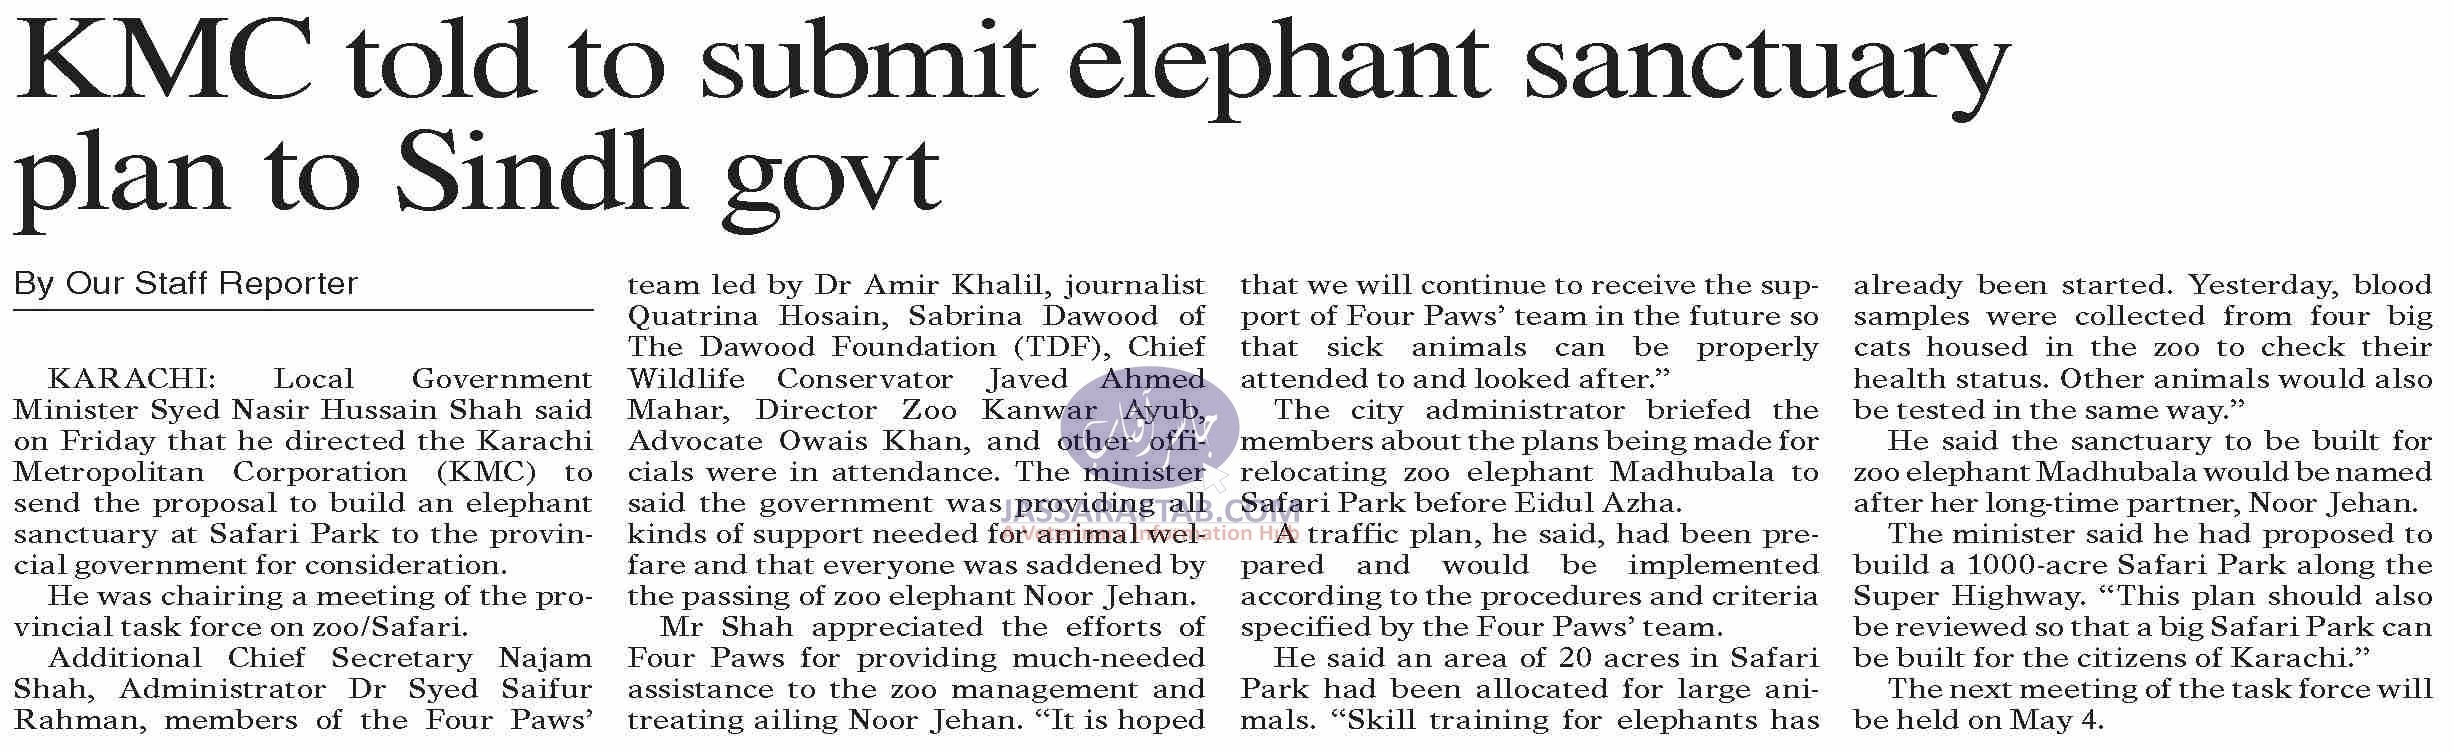 KMC told to submit elephant sanctuary plan to Sindh govt